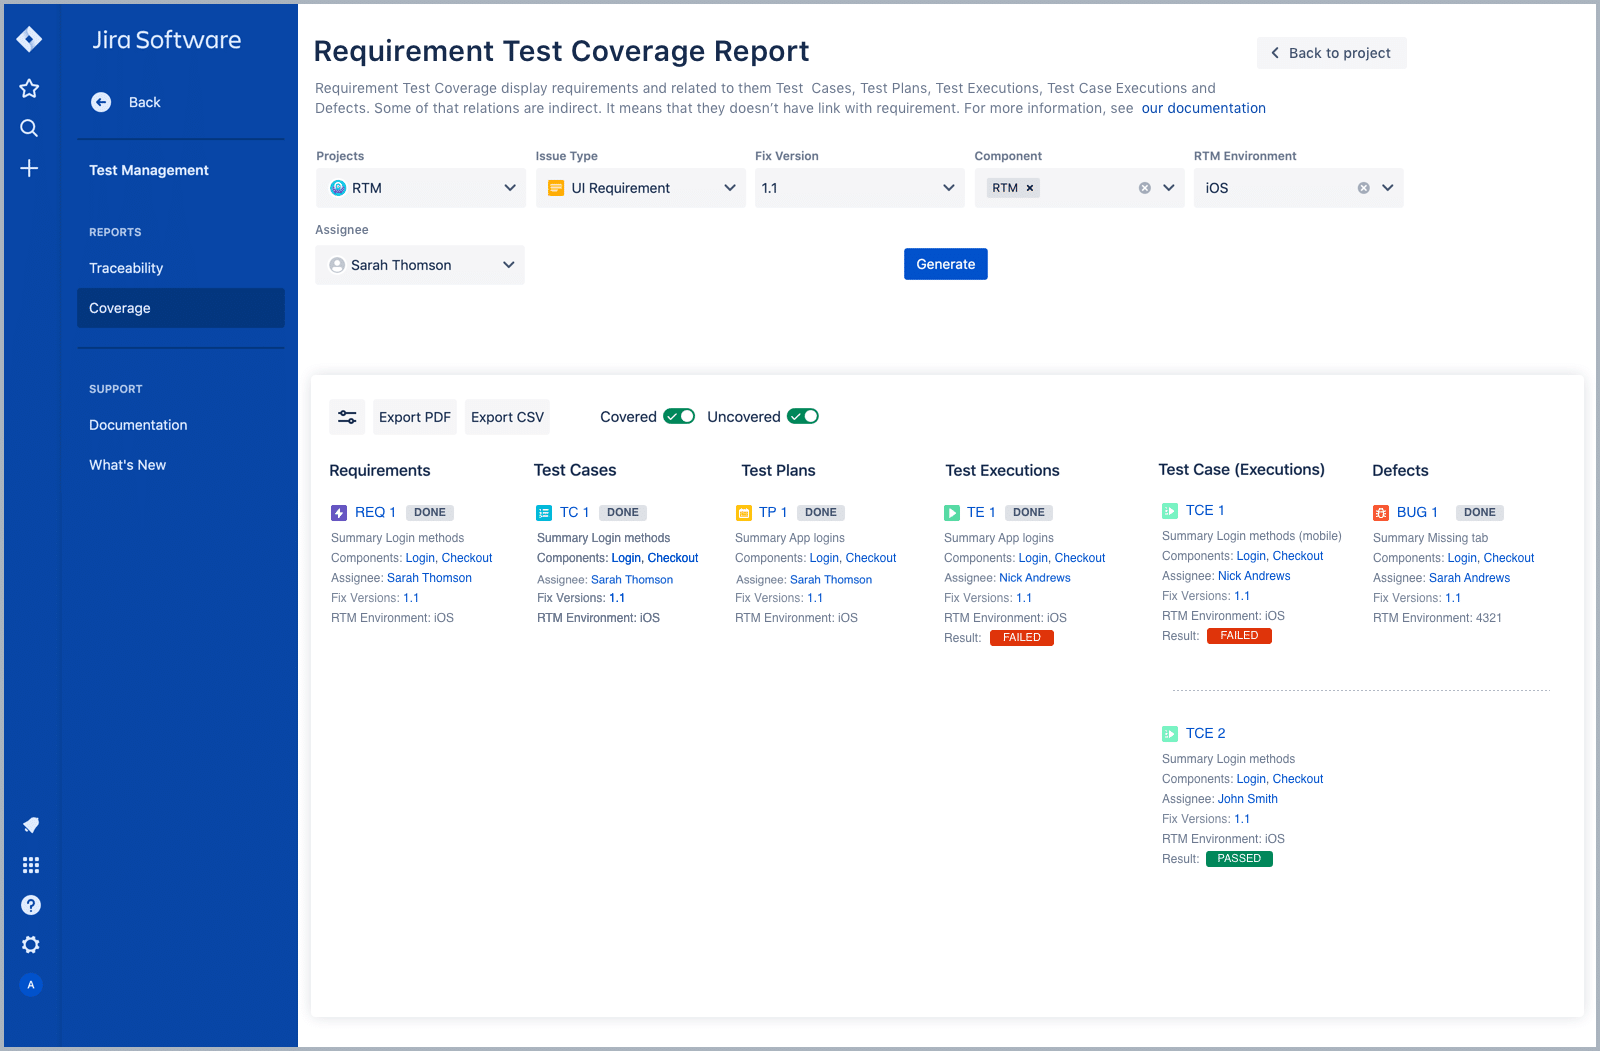 requirement test coverage report page screen showing Projects, Issue Type, Fix Version, Component, RTM Environment. Below this section we can see: Requirements, Test Cases, Test Plans, Test Executions, Test Case, Defects